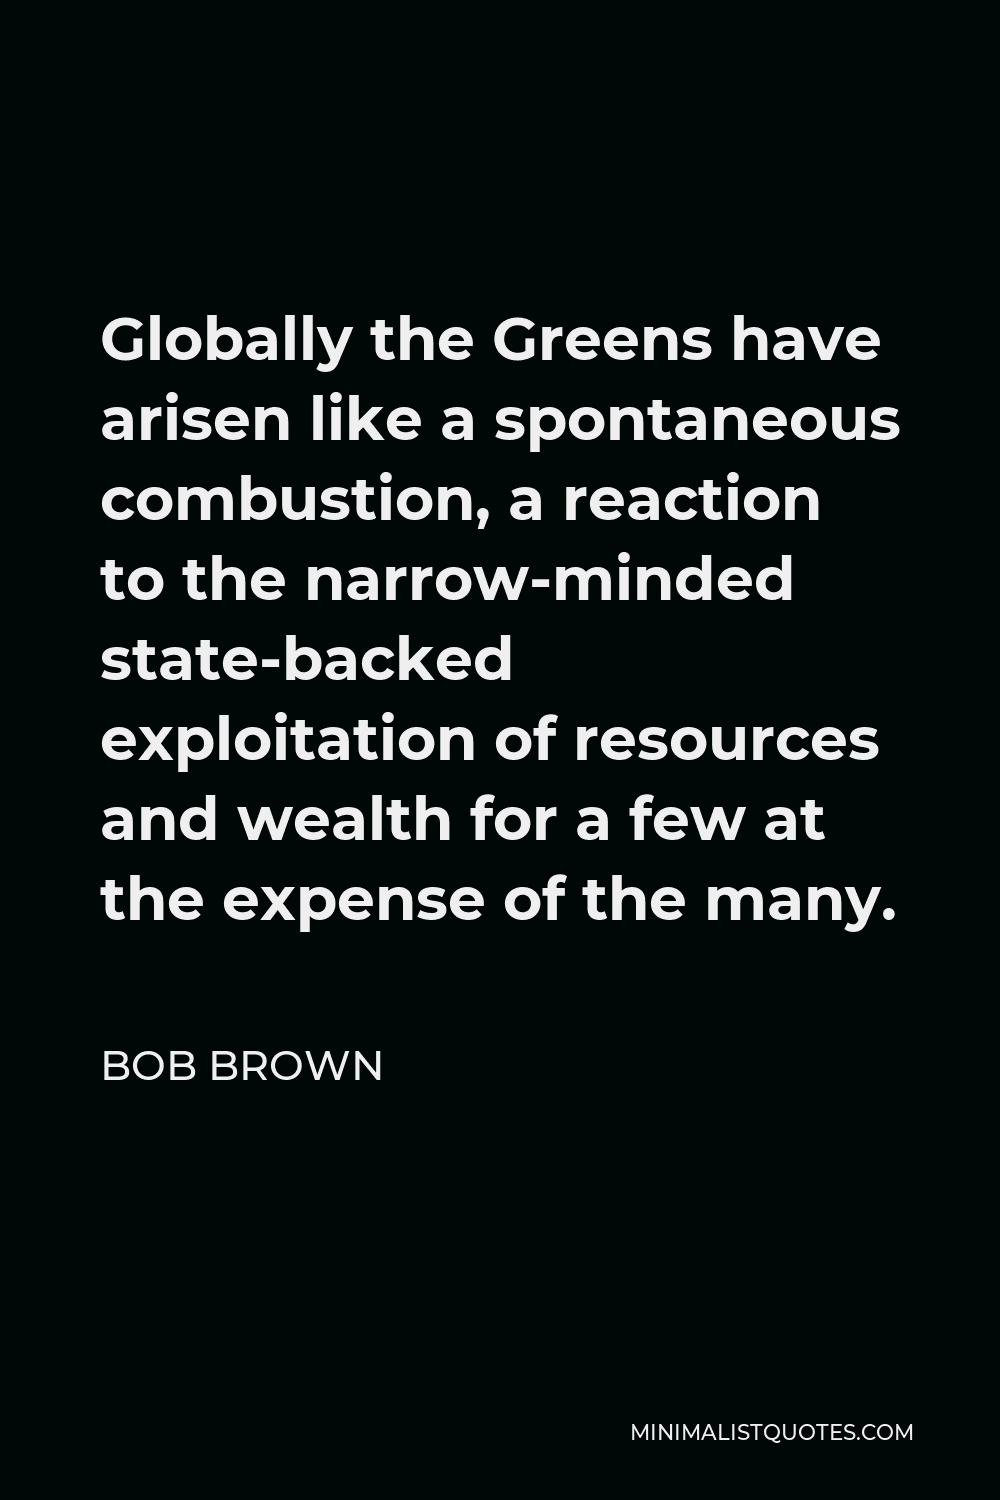 Bob Brown Quote - Globally the Greens have arisen like a spontaneous combustion, a reaction to the narrow-minded state-backed exploitation of resources and wealth for a few at the expense of the many.